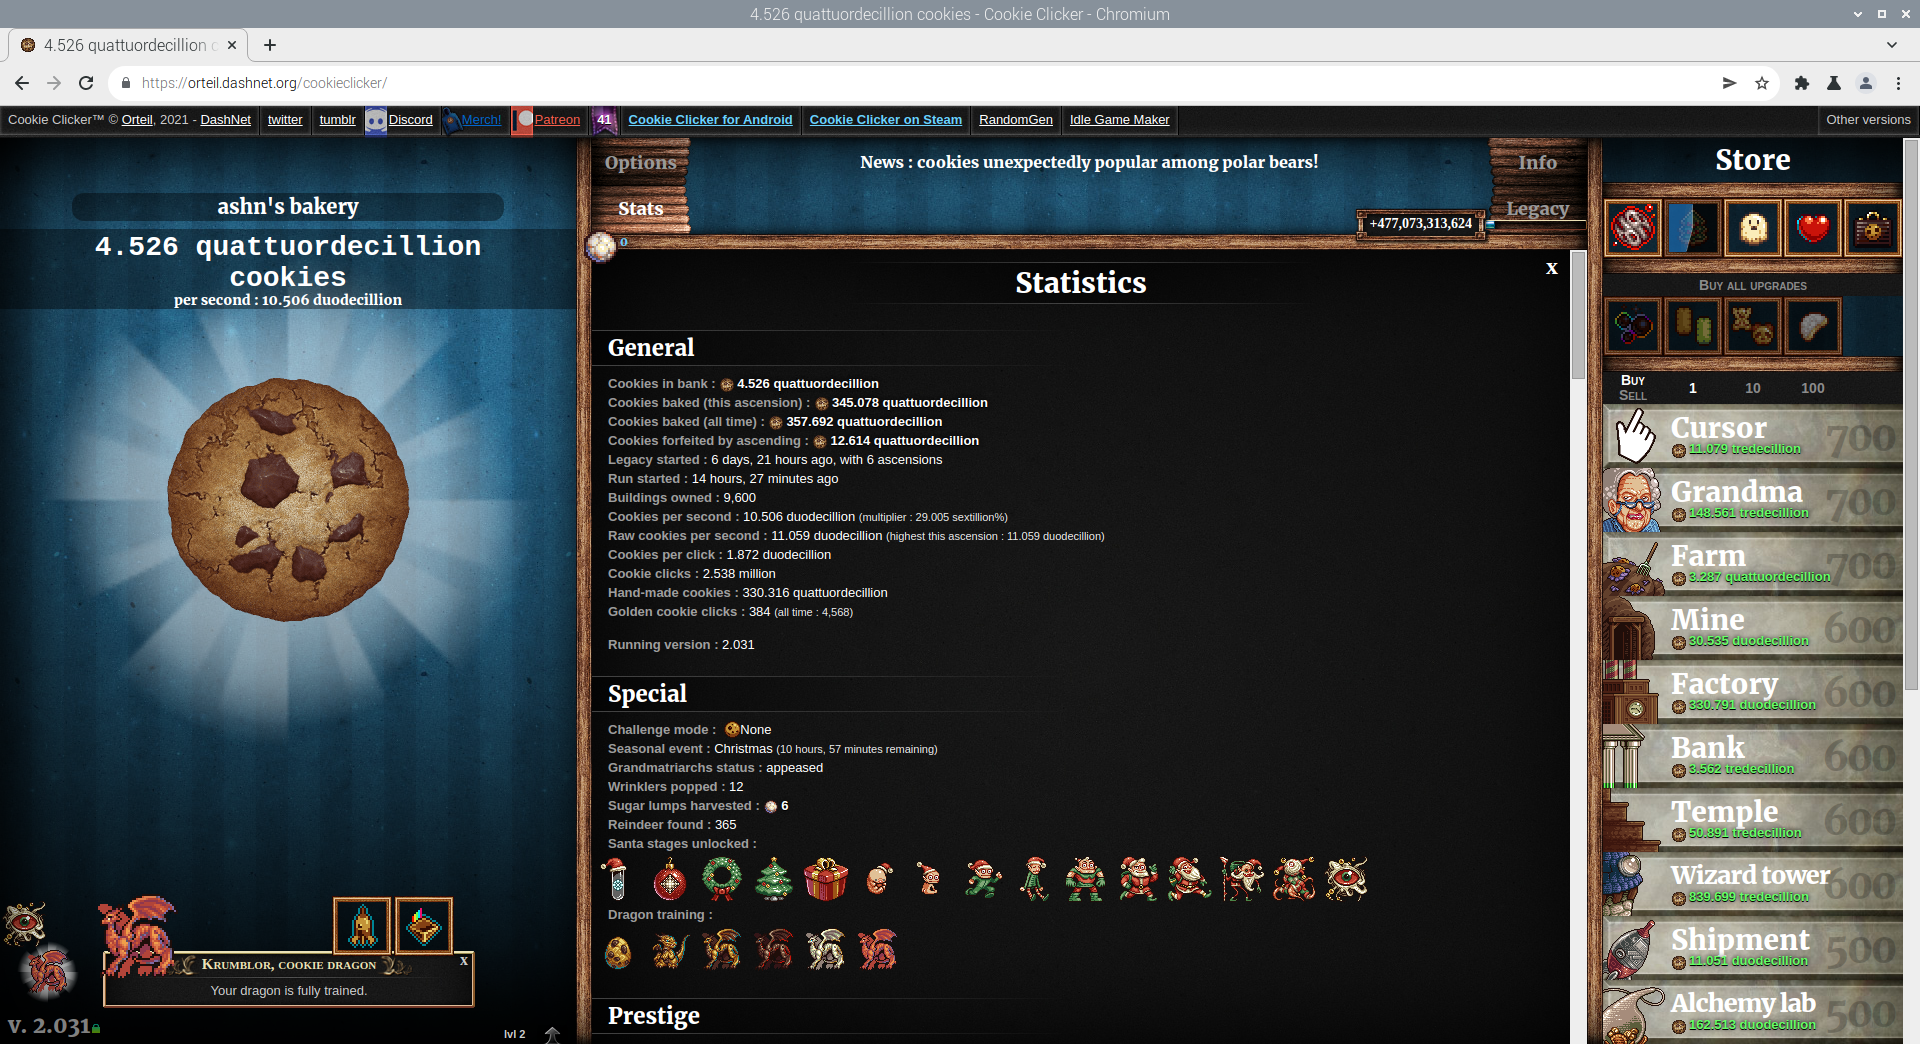 Cookie Clicker but You Type System Requirements - Can I Run It? -  PCGameBenchmark